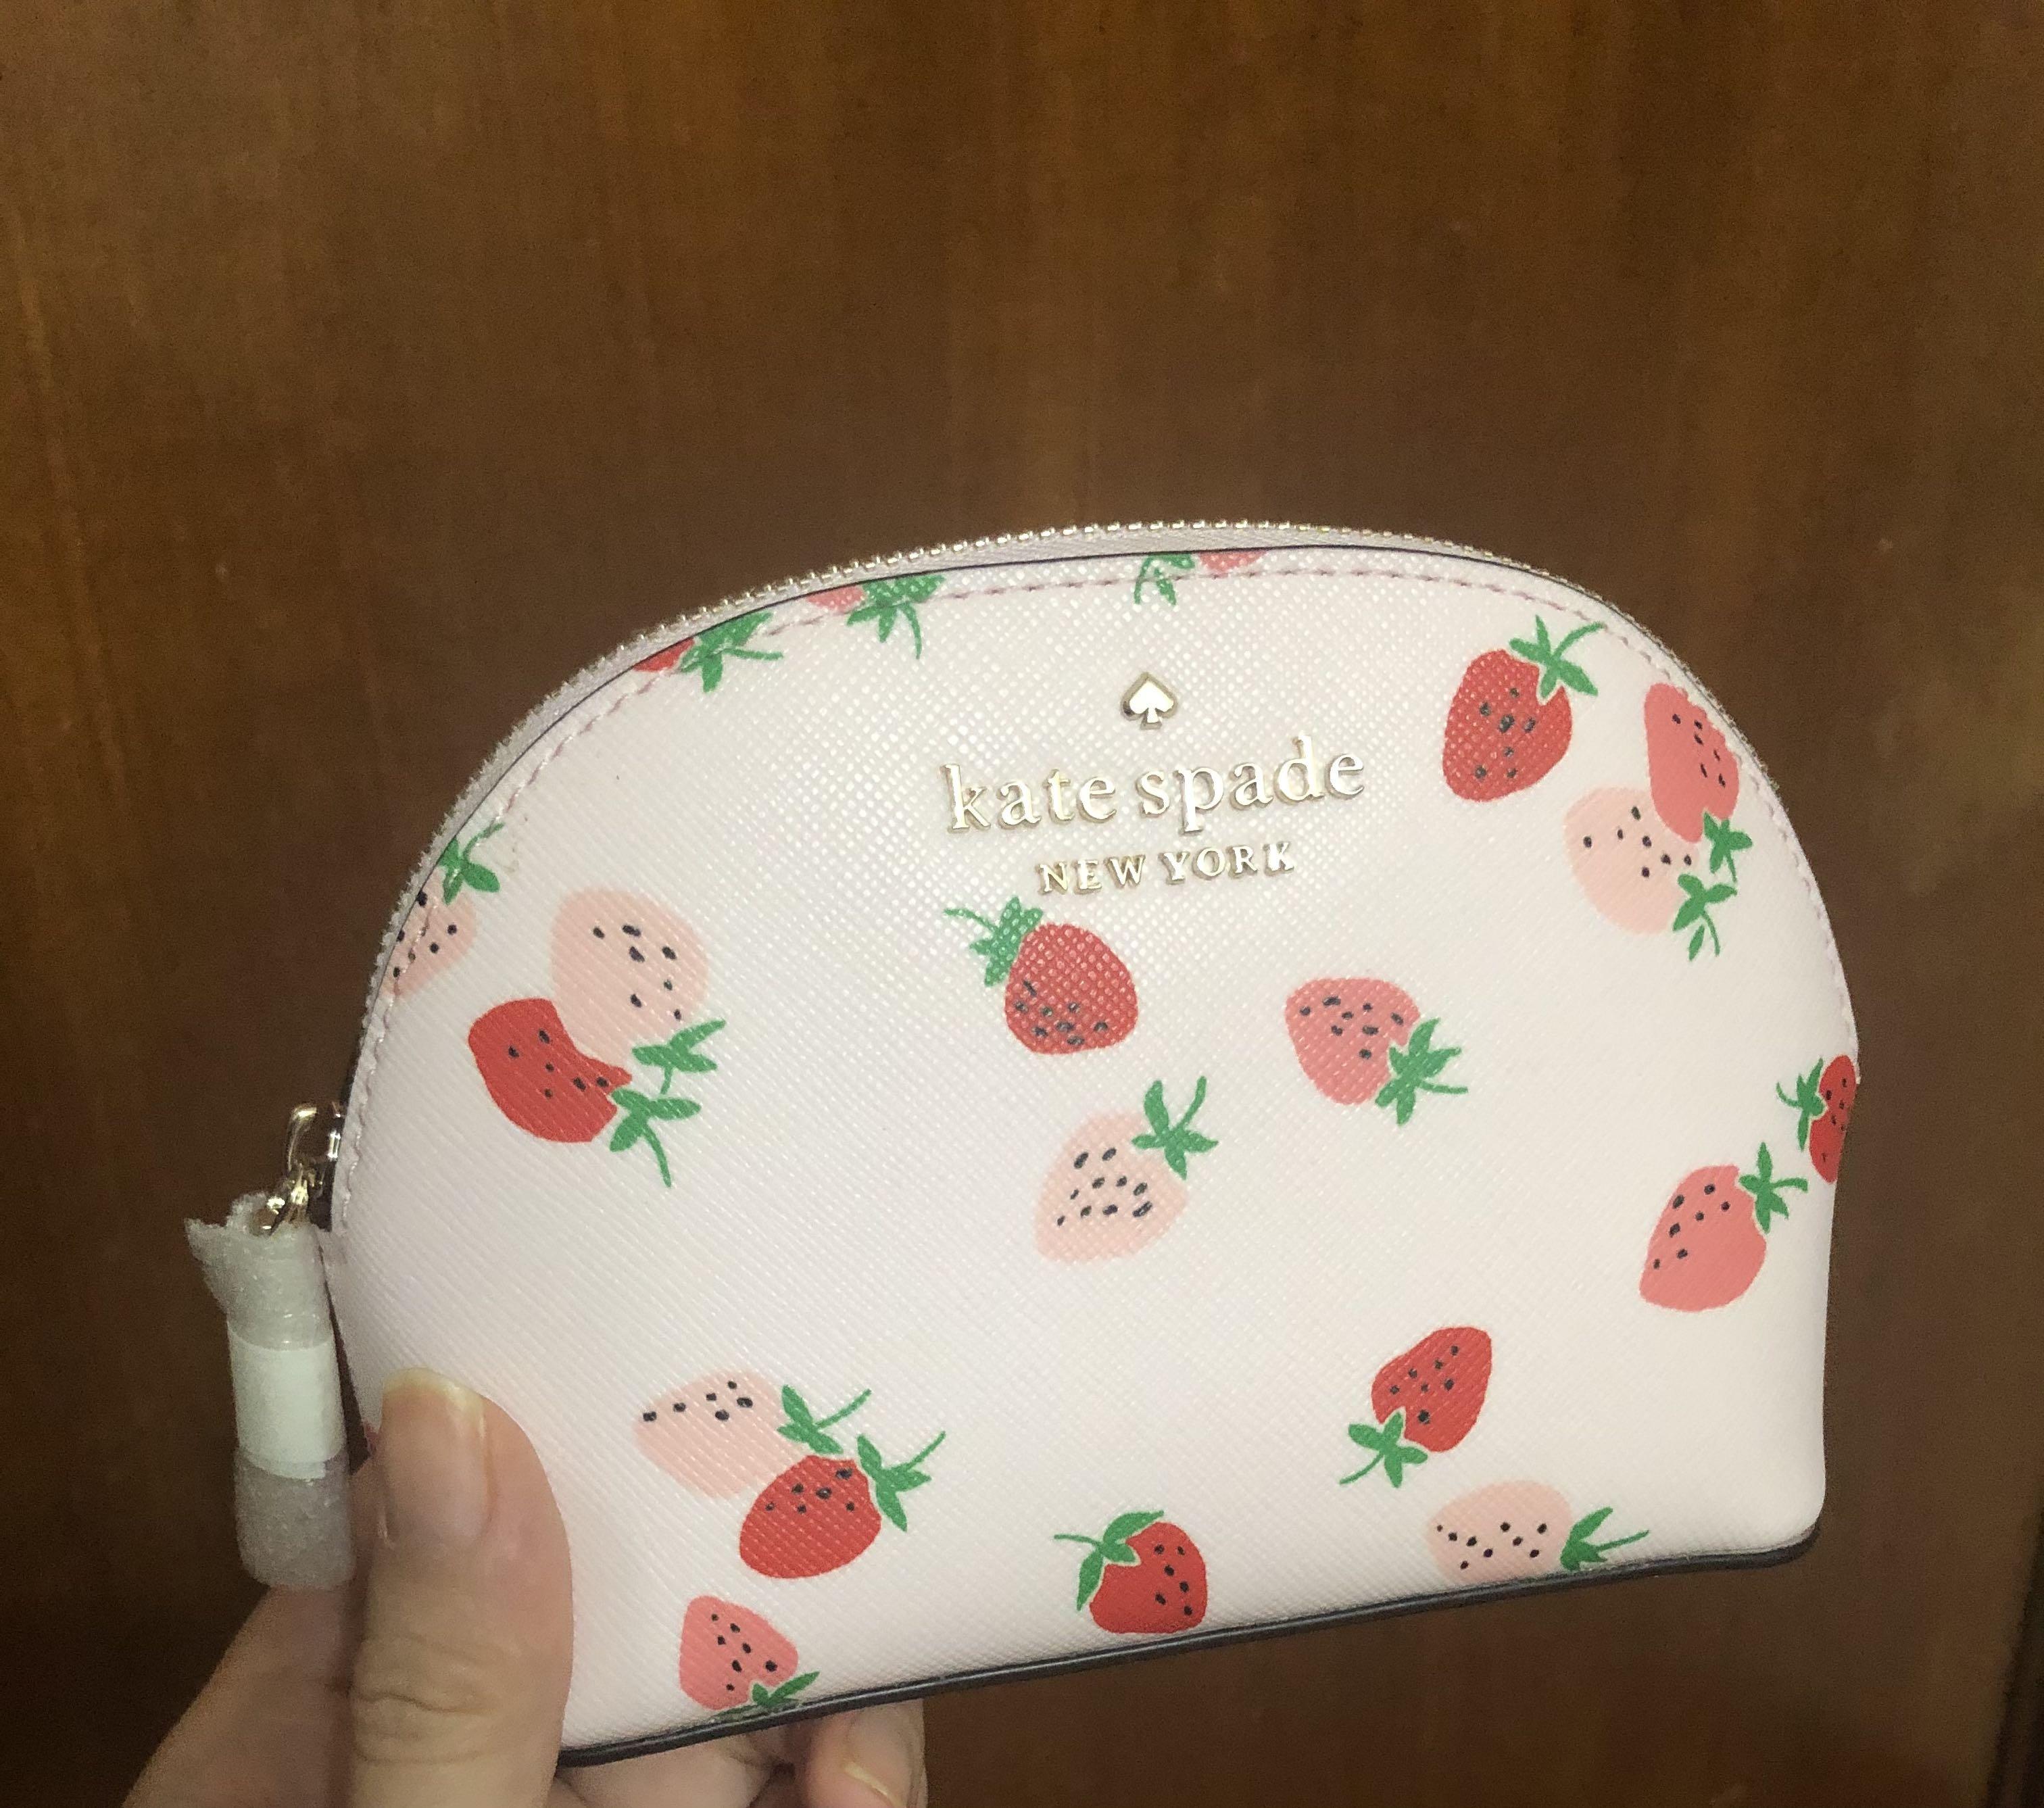 Kate Spade cosmetic dome strawberry